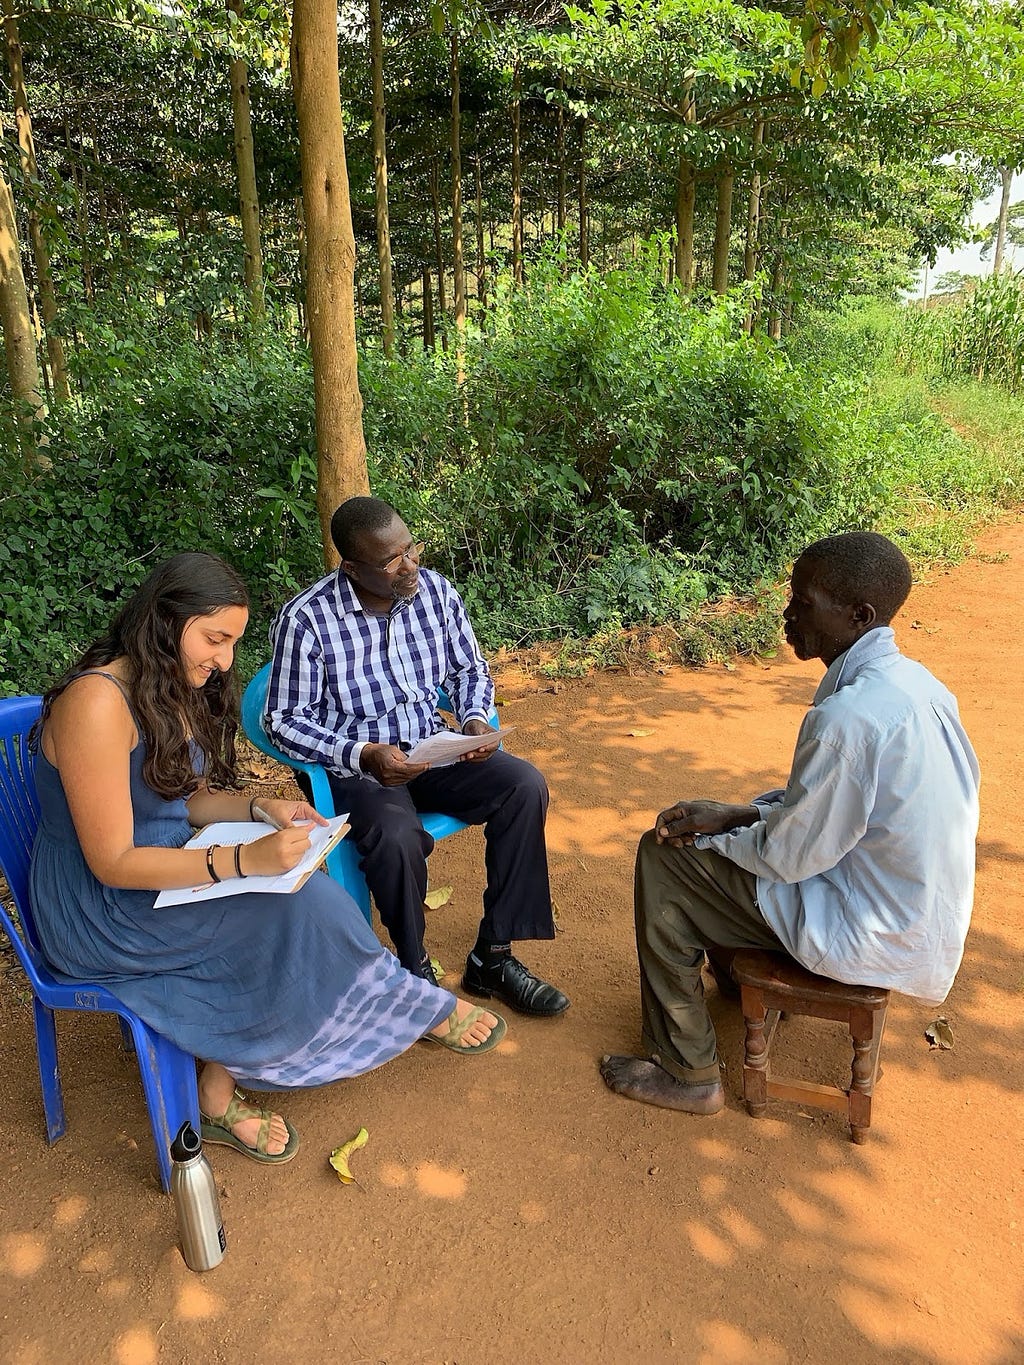 Three people sit on chairs on a sandy path in a rural area, two talking and one taking notes.